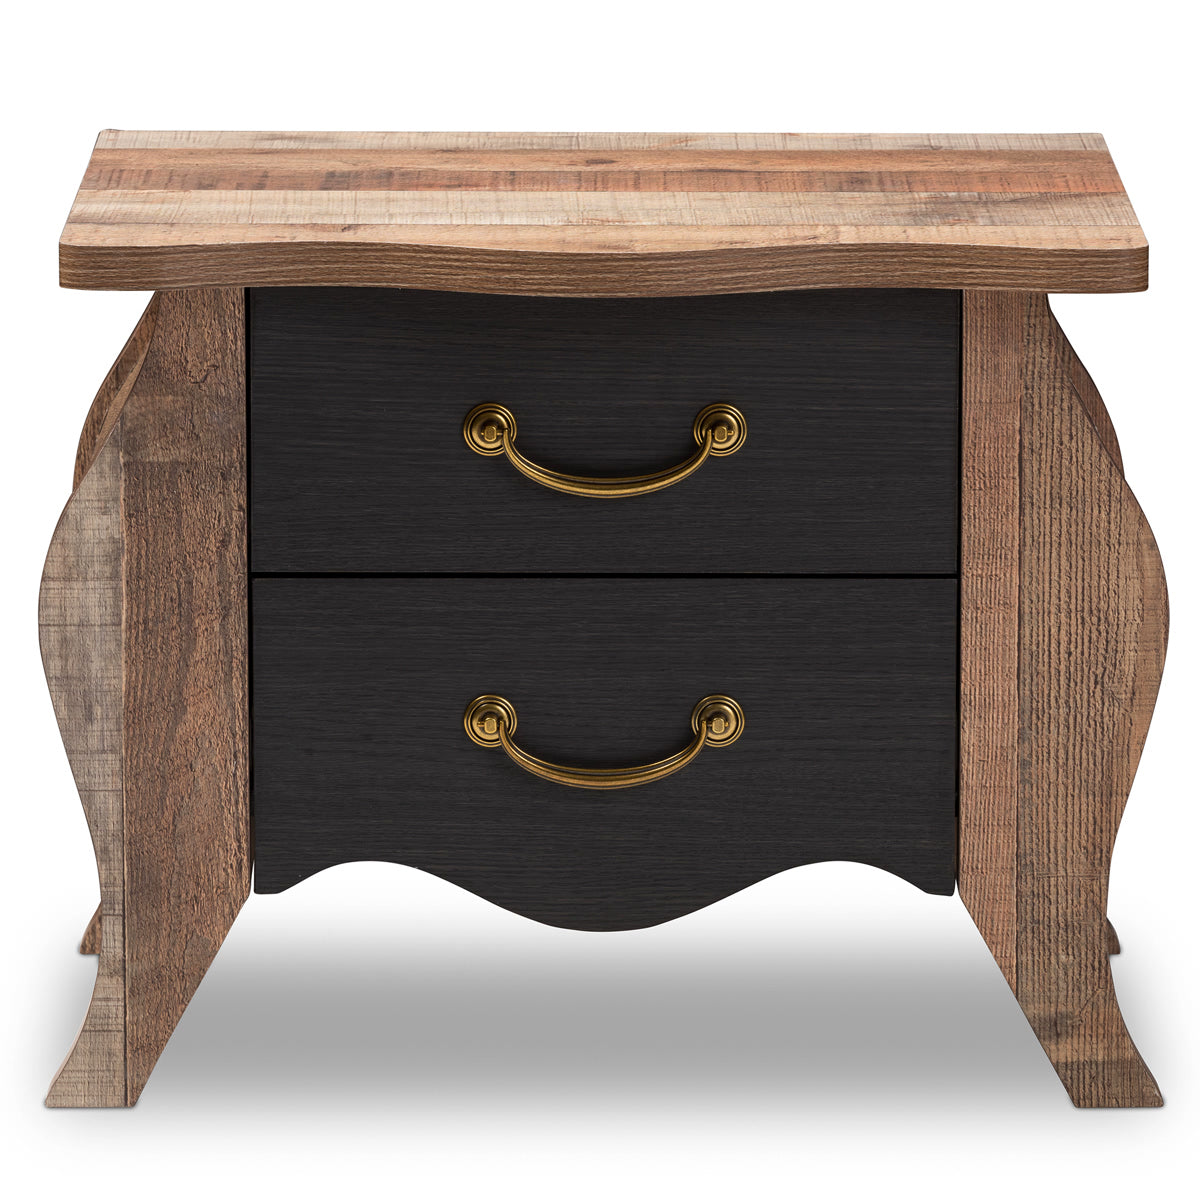 Baxton Studio Romilly Country Cottage Farmhouse Black and Oak-Finished Wood 2-Drawer Nightstand Baxton Studio-nightstands-Minimal And Modern - 4